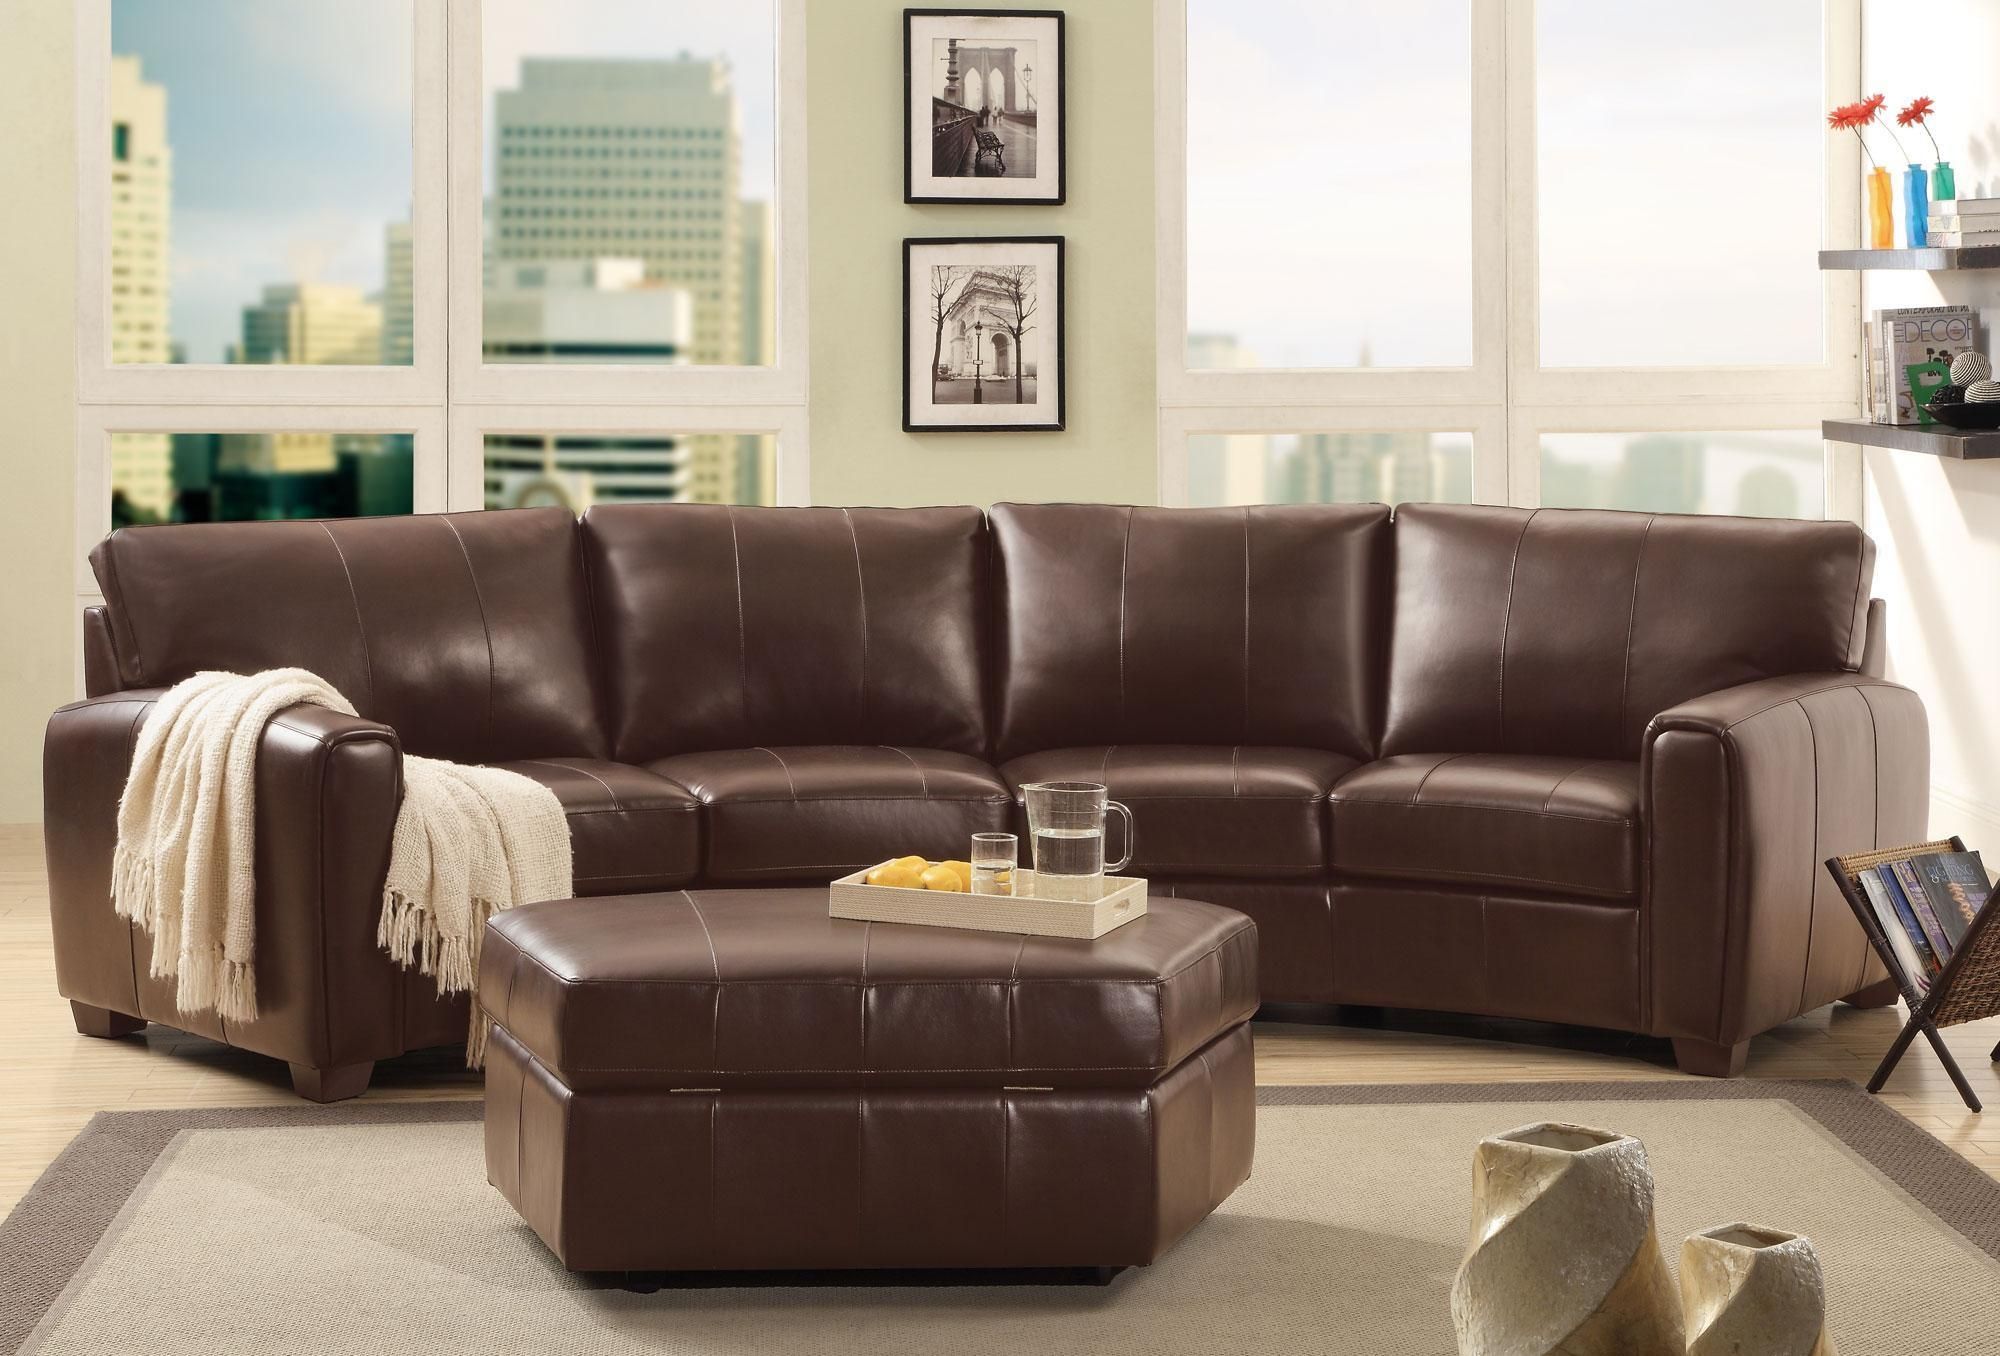 Bonded Leather Curved Sofa Sectional 503401 Regarding Leather Curved Sectional (View 3 of 20)